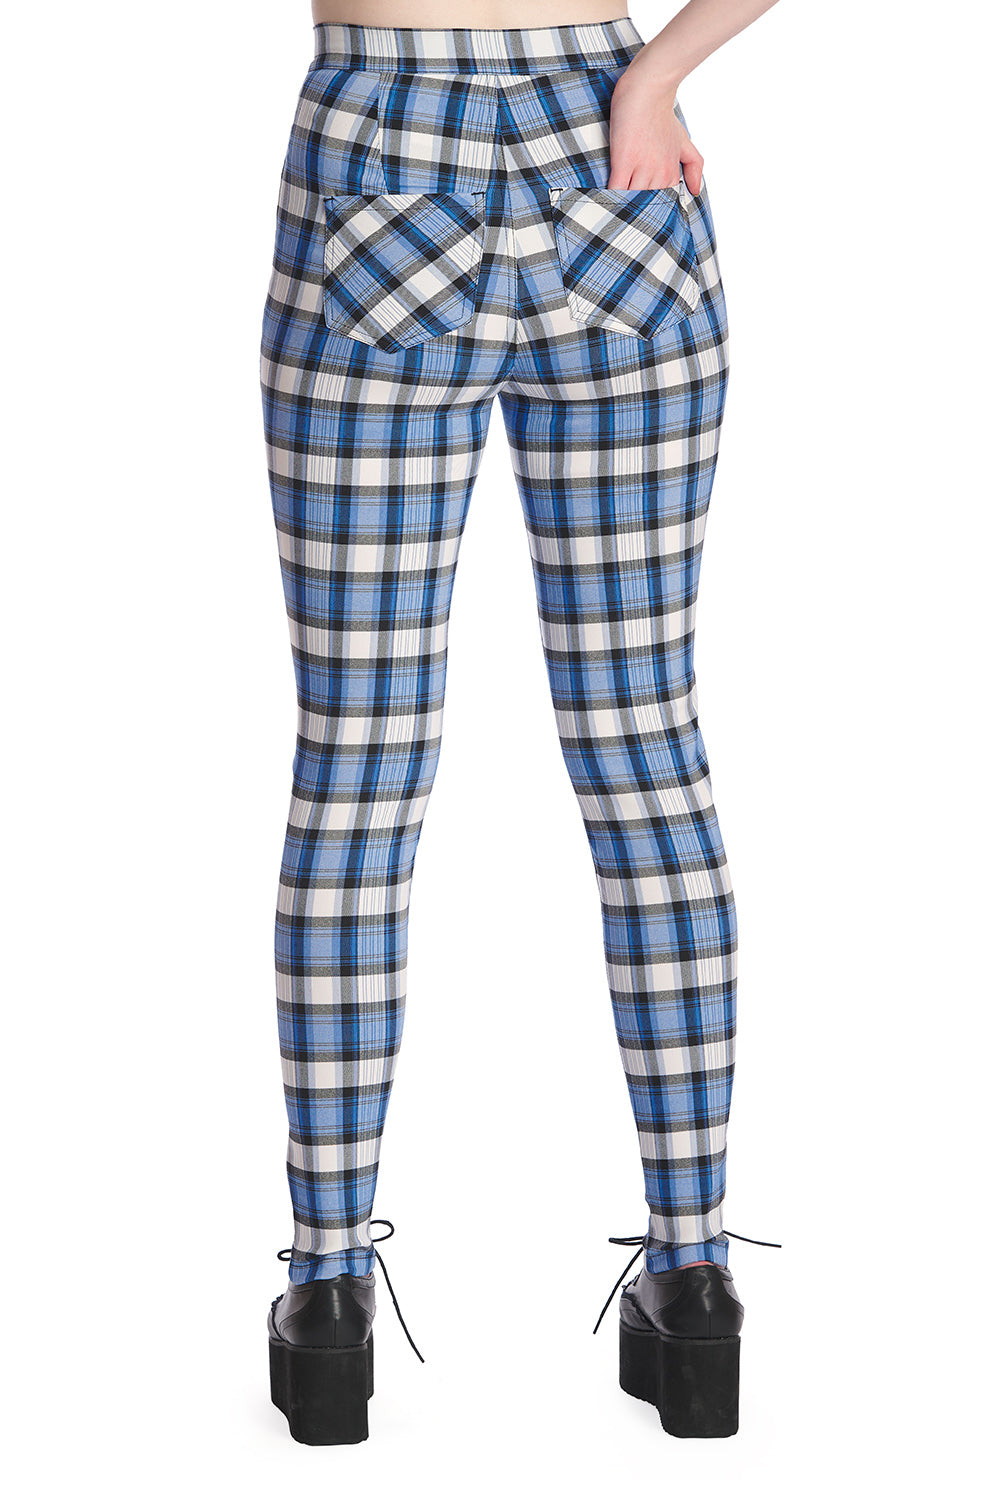  High waisted check skinny legged trousers in blue